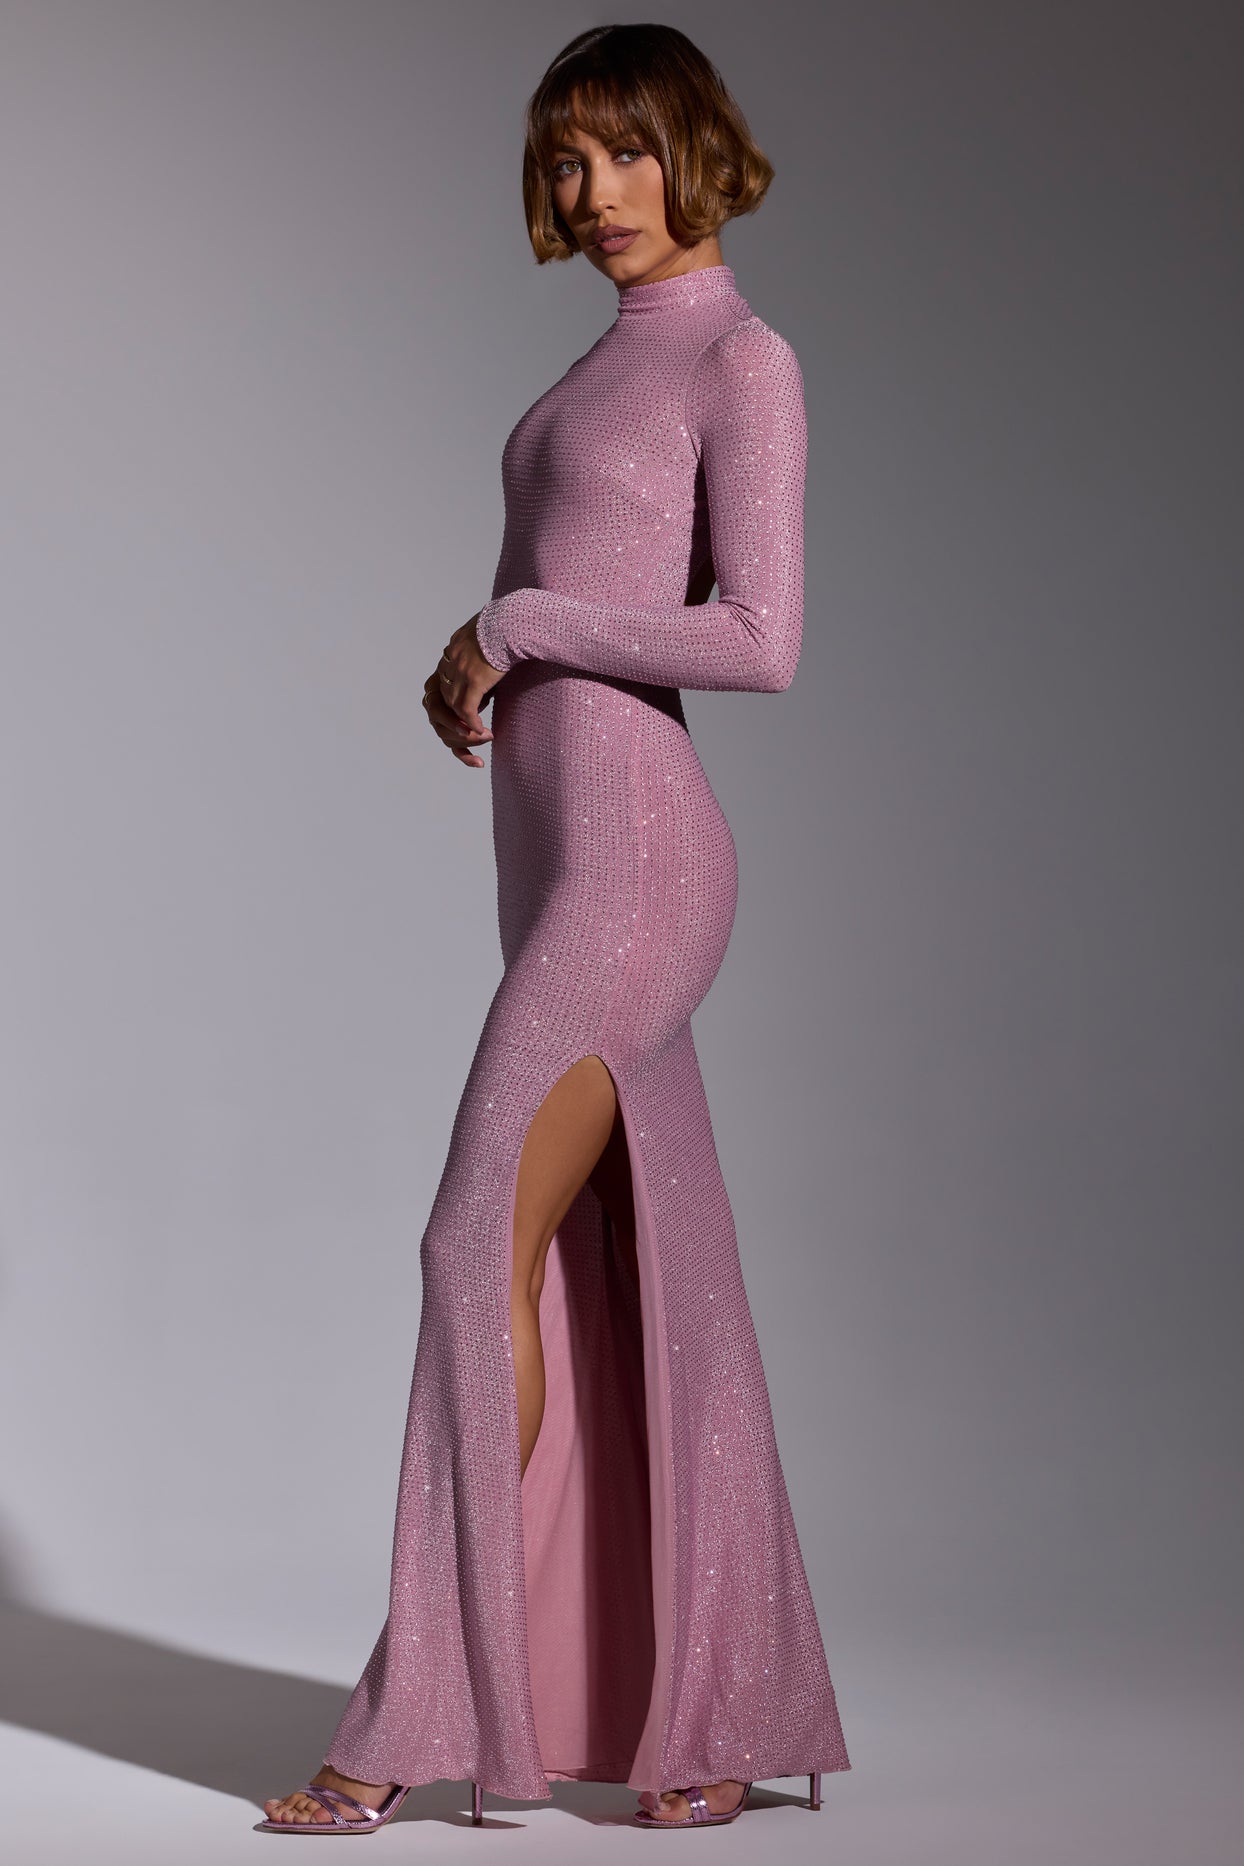 Embellished Long Sleeve Evening Gown in Light Pink